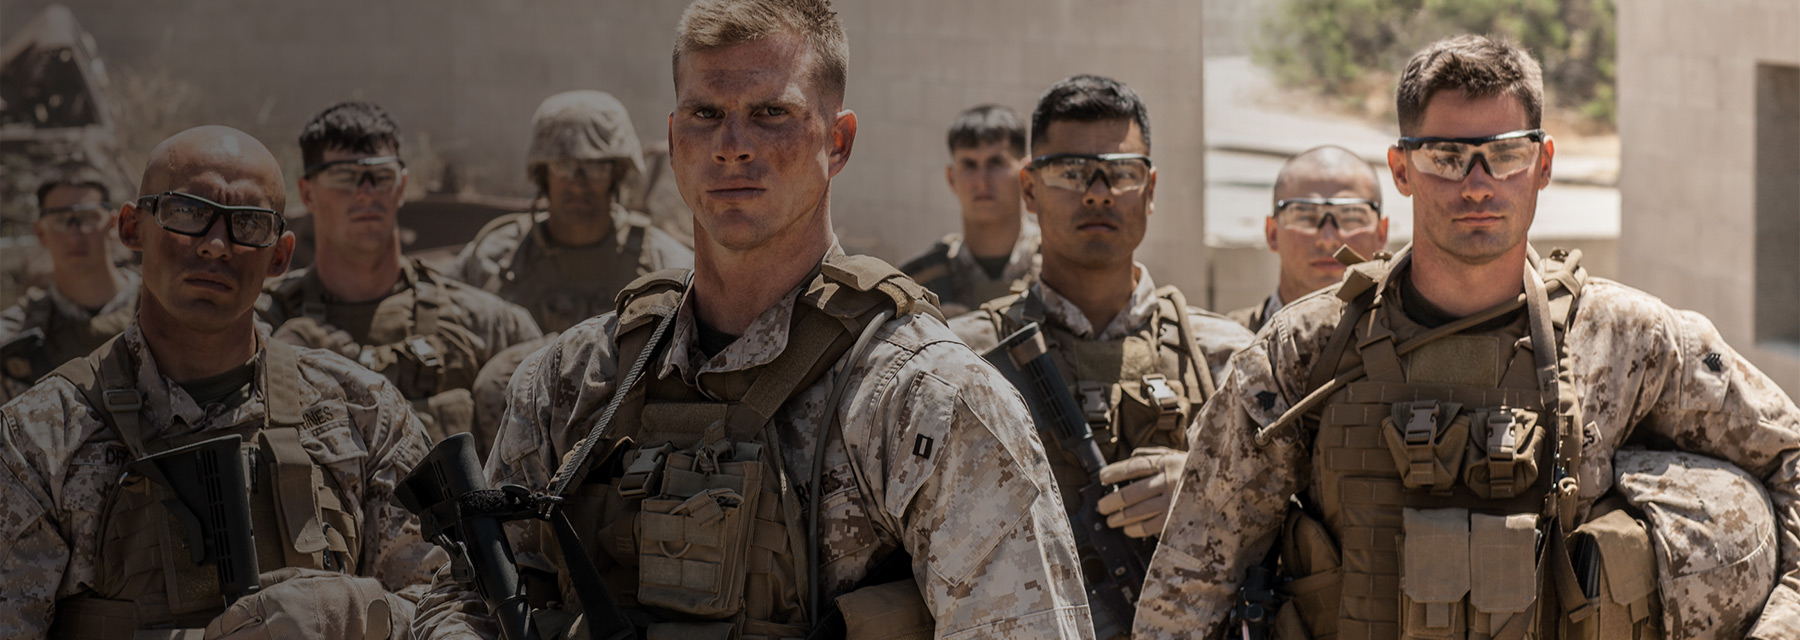 how to become a officer in the marine corps